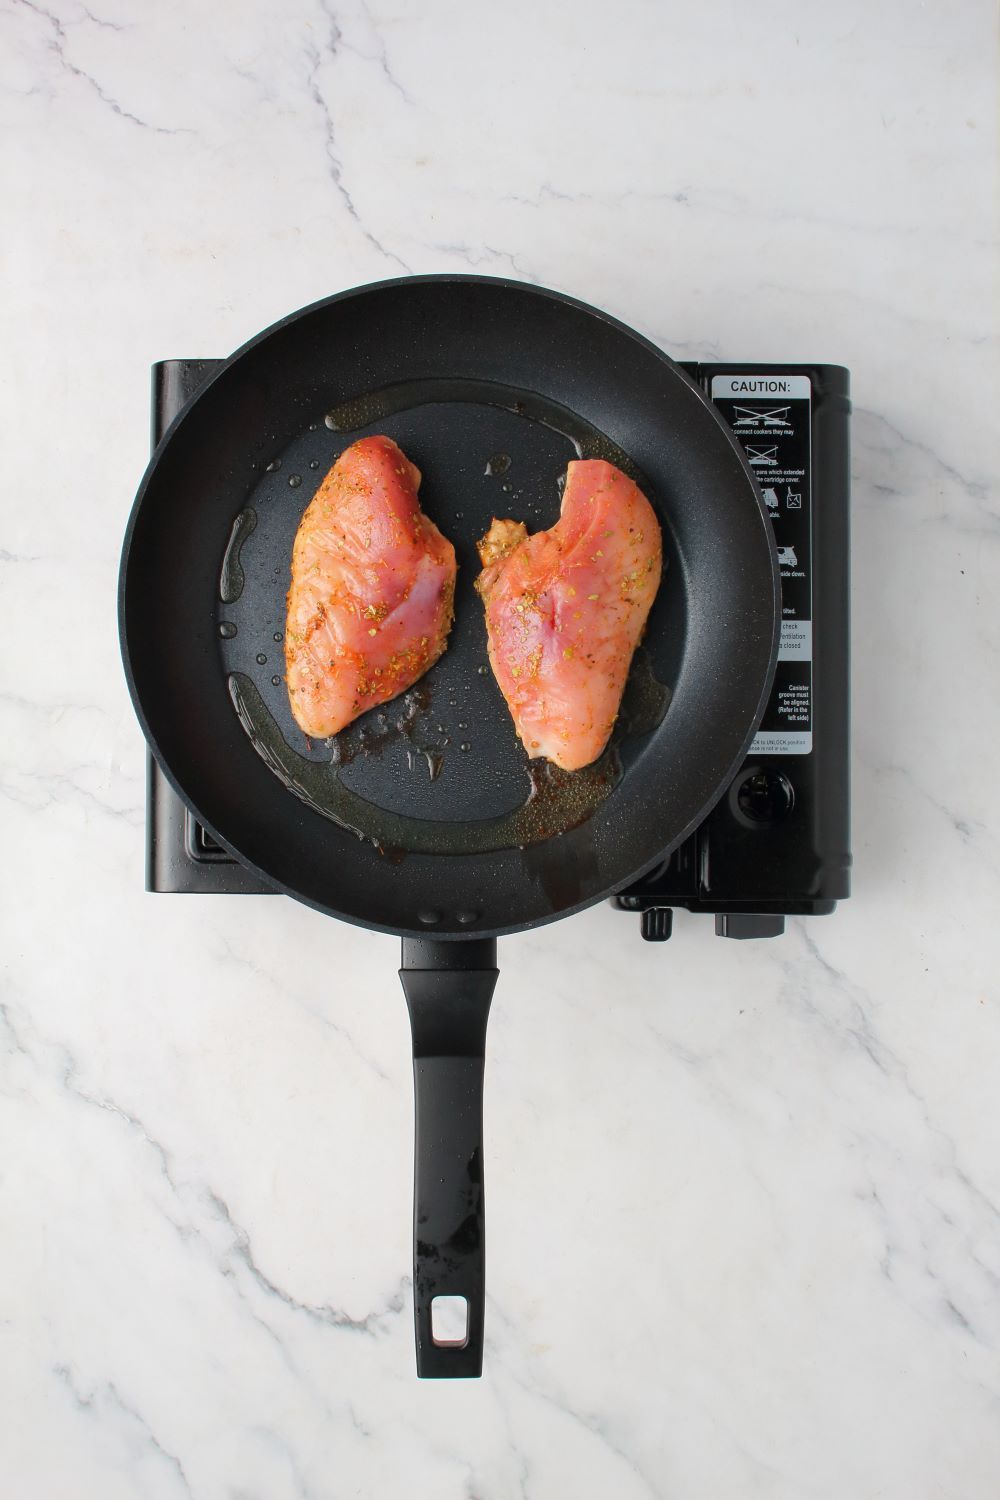 Pan frying the chicken breast